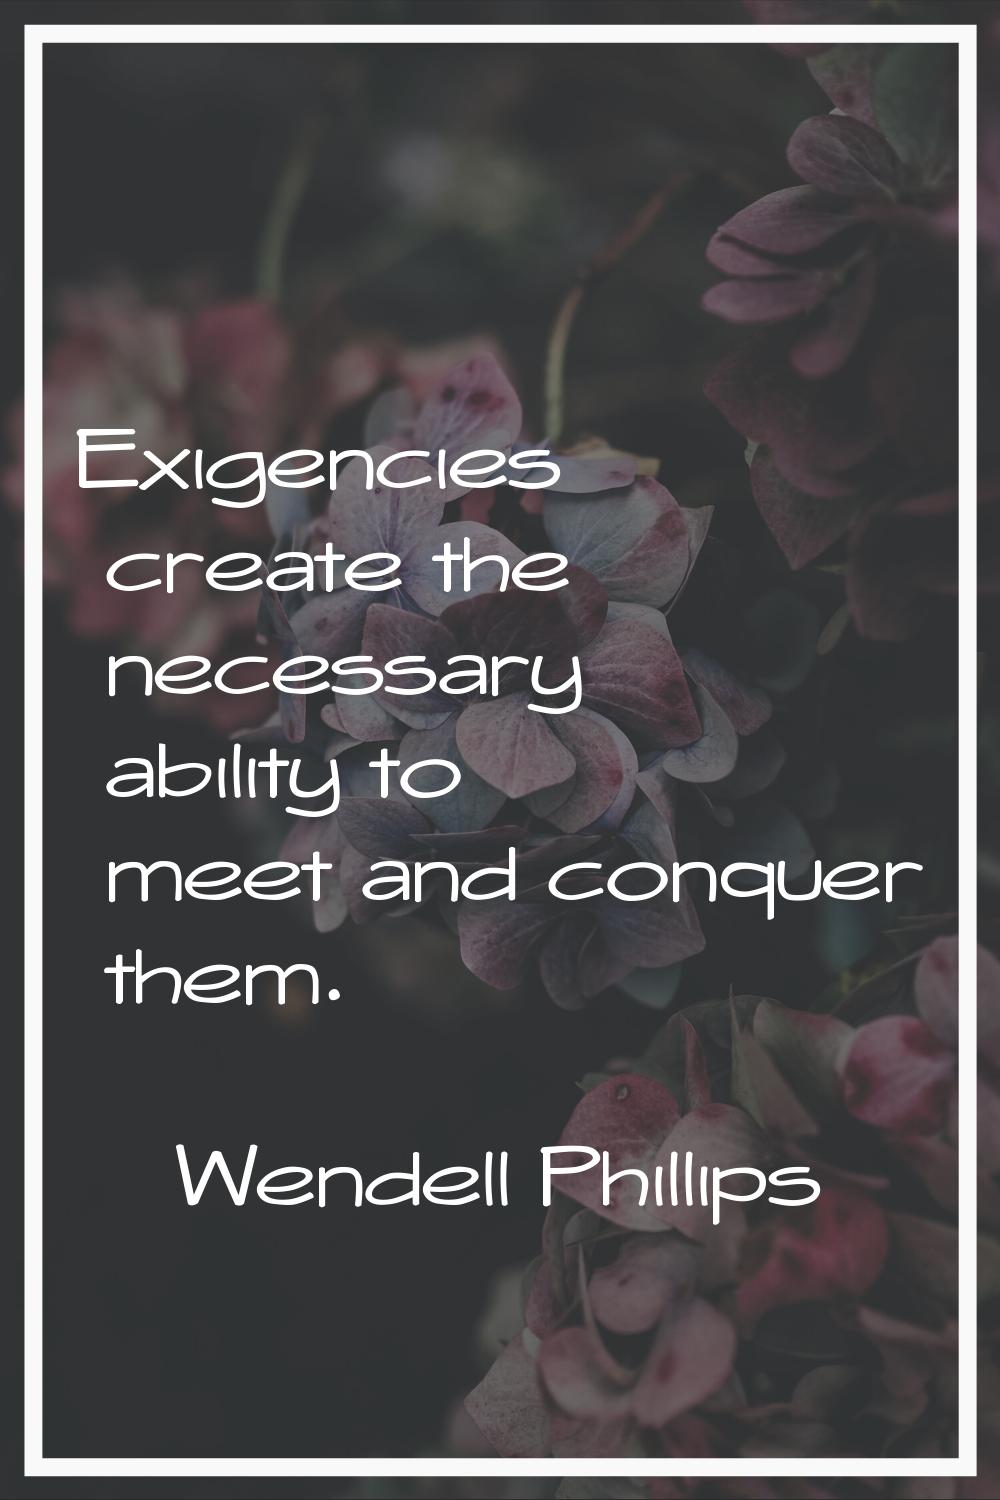 Exigencies create the necessary ability to meet and conquer them.